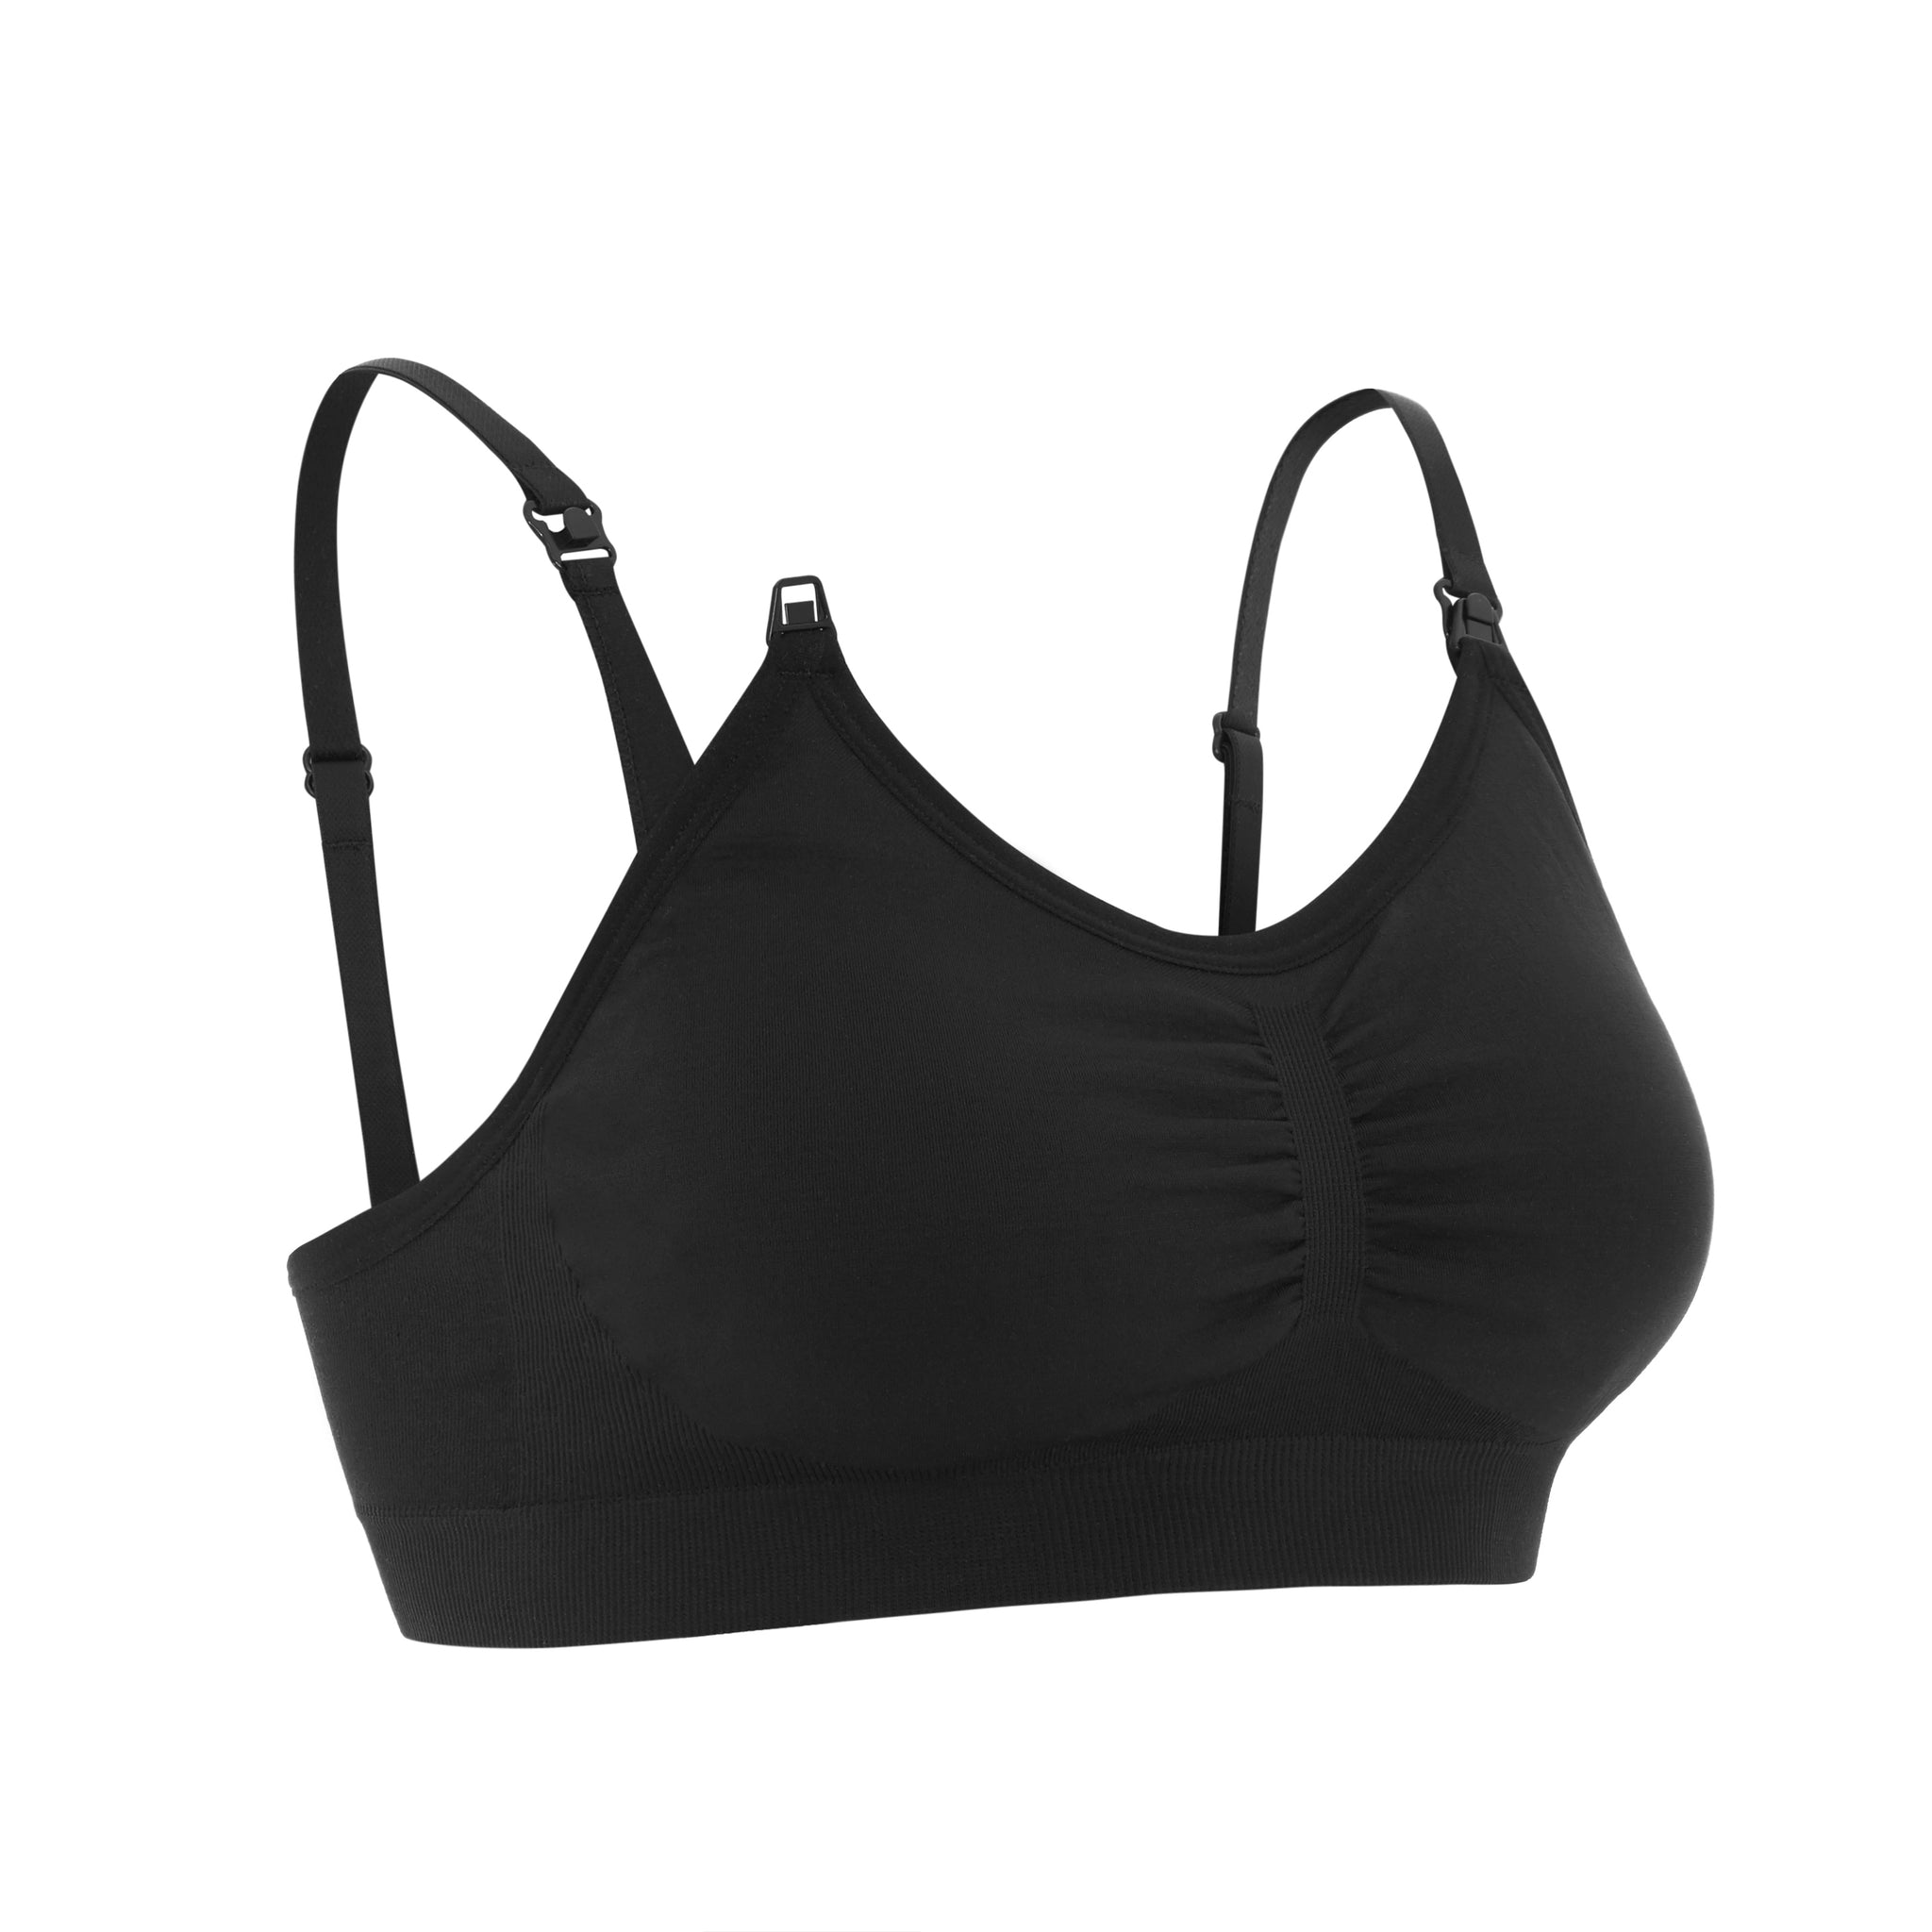 Under Control | 3 pack Nursing Bra Super Soft and Comfy, Comes with Free Hook & Eye Extension Pad (Black, Sand, Heather Grey)